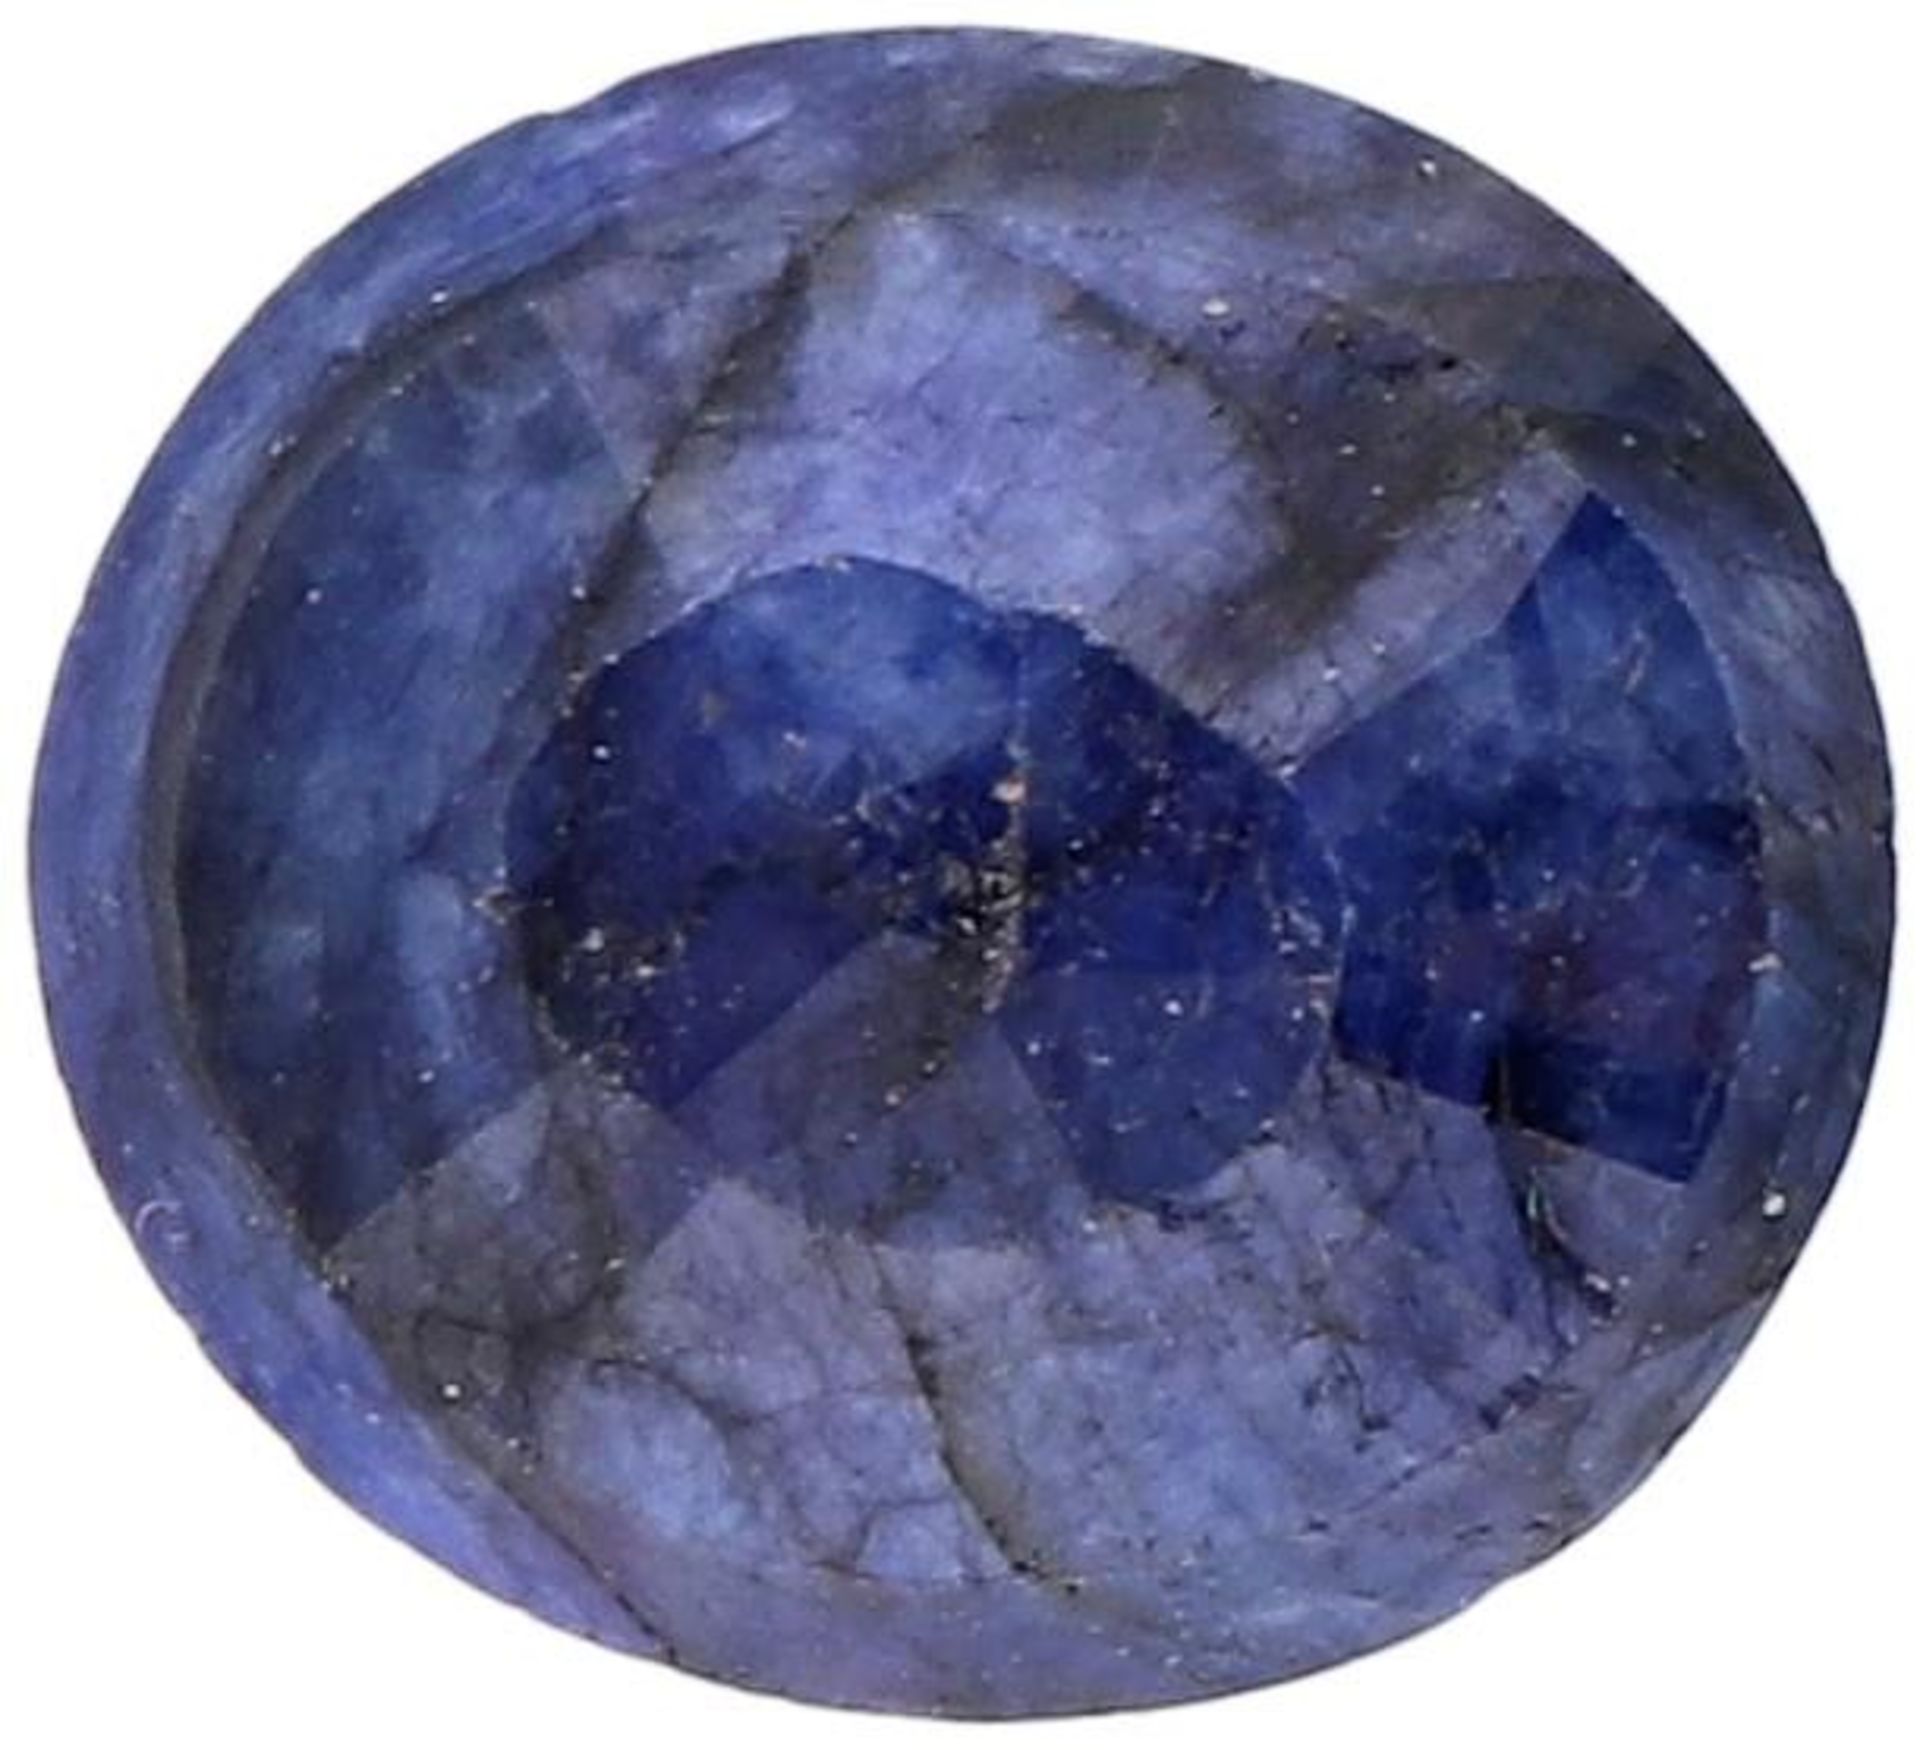 GJSPC Certified Natural Sapphire Gemstone 7.79 ct. - Image 2 of 3